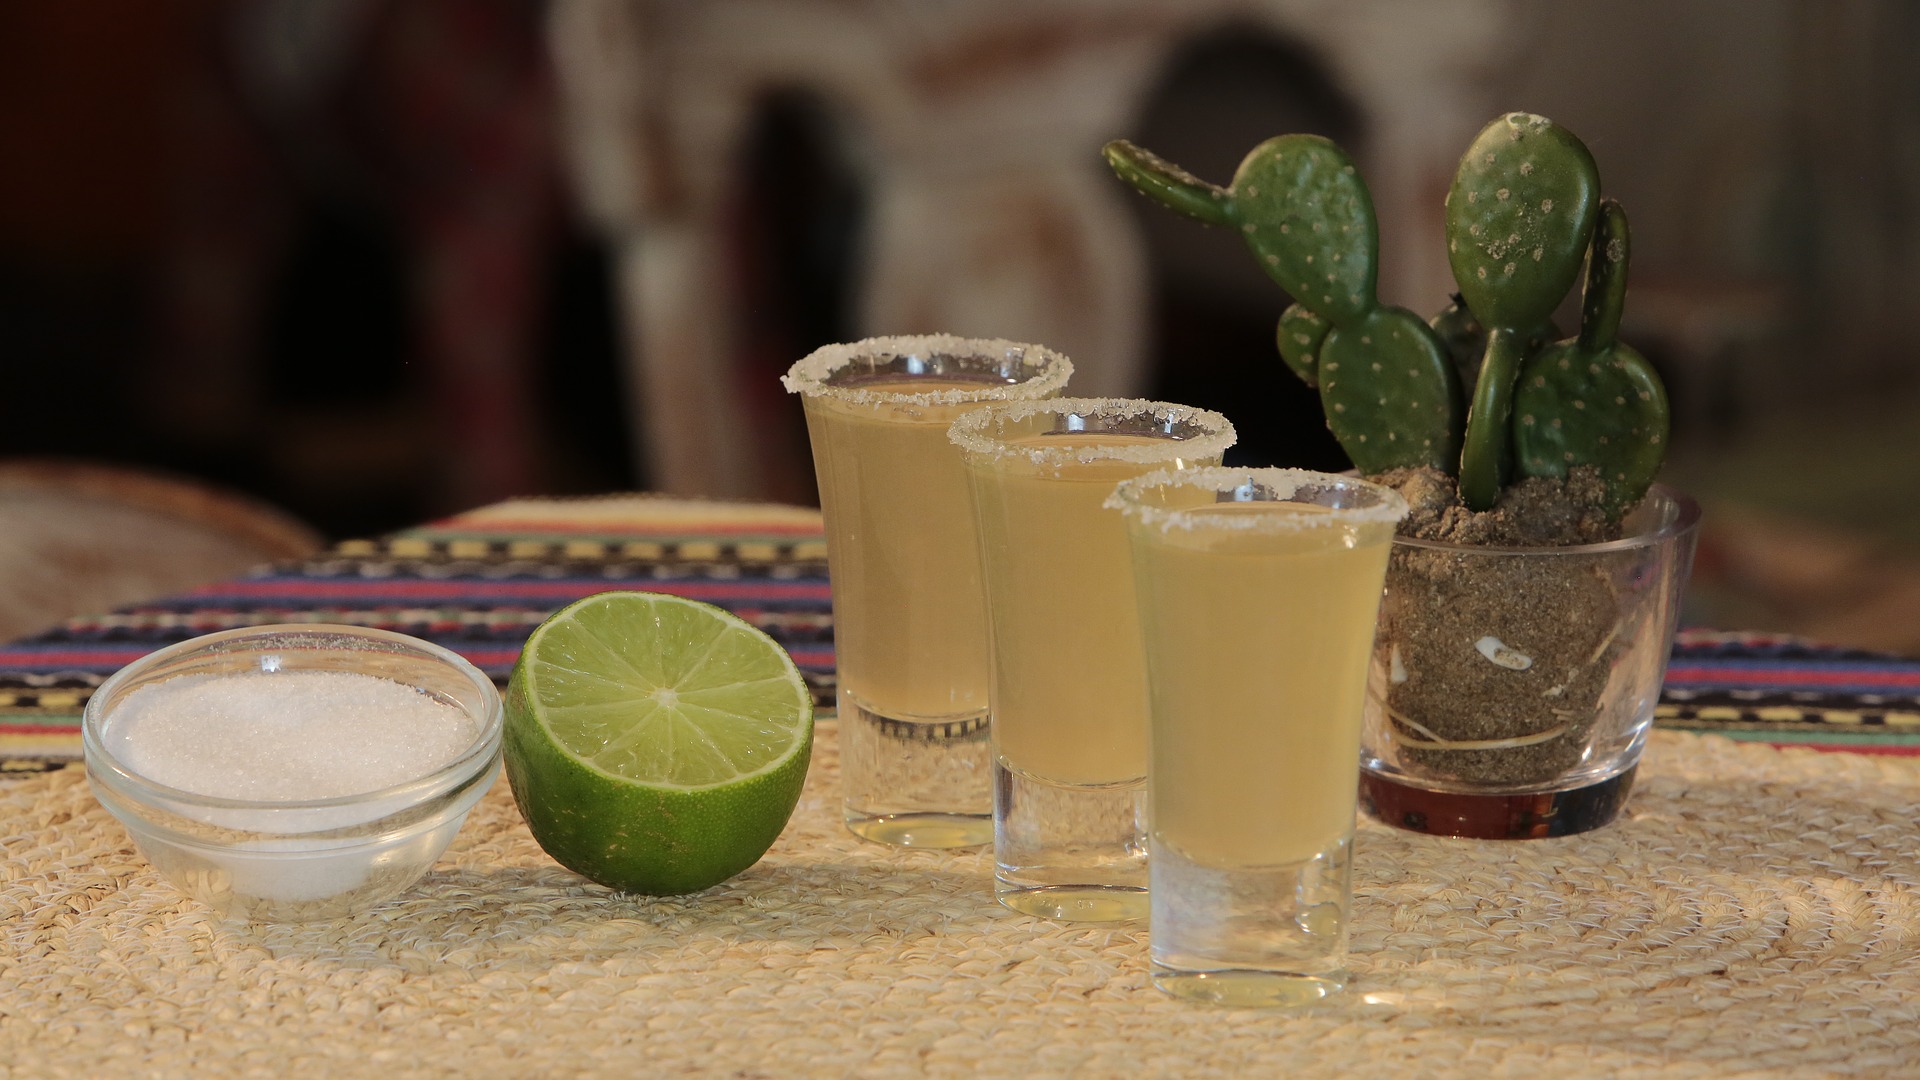 Tequila -  One of The Most Popular Mexican Beverages